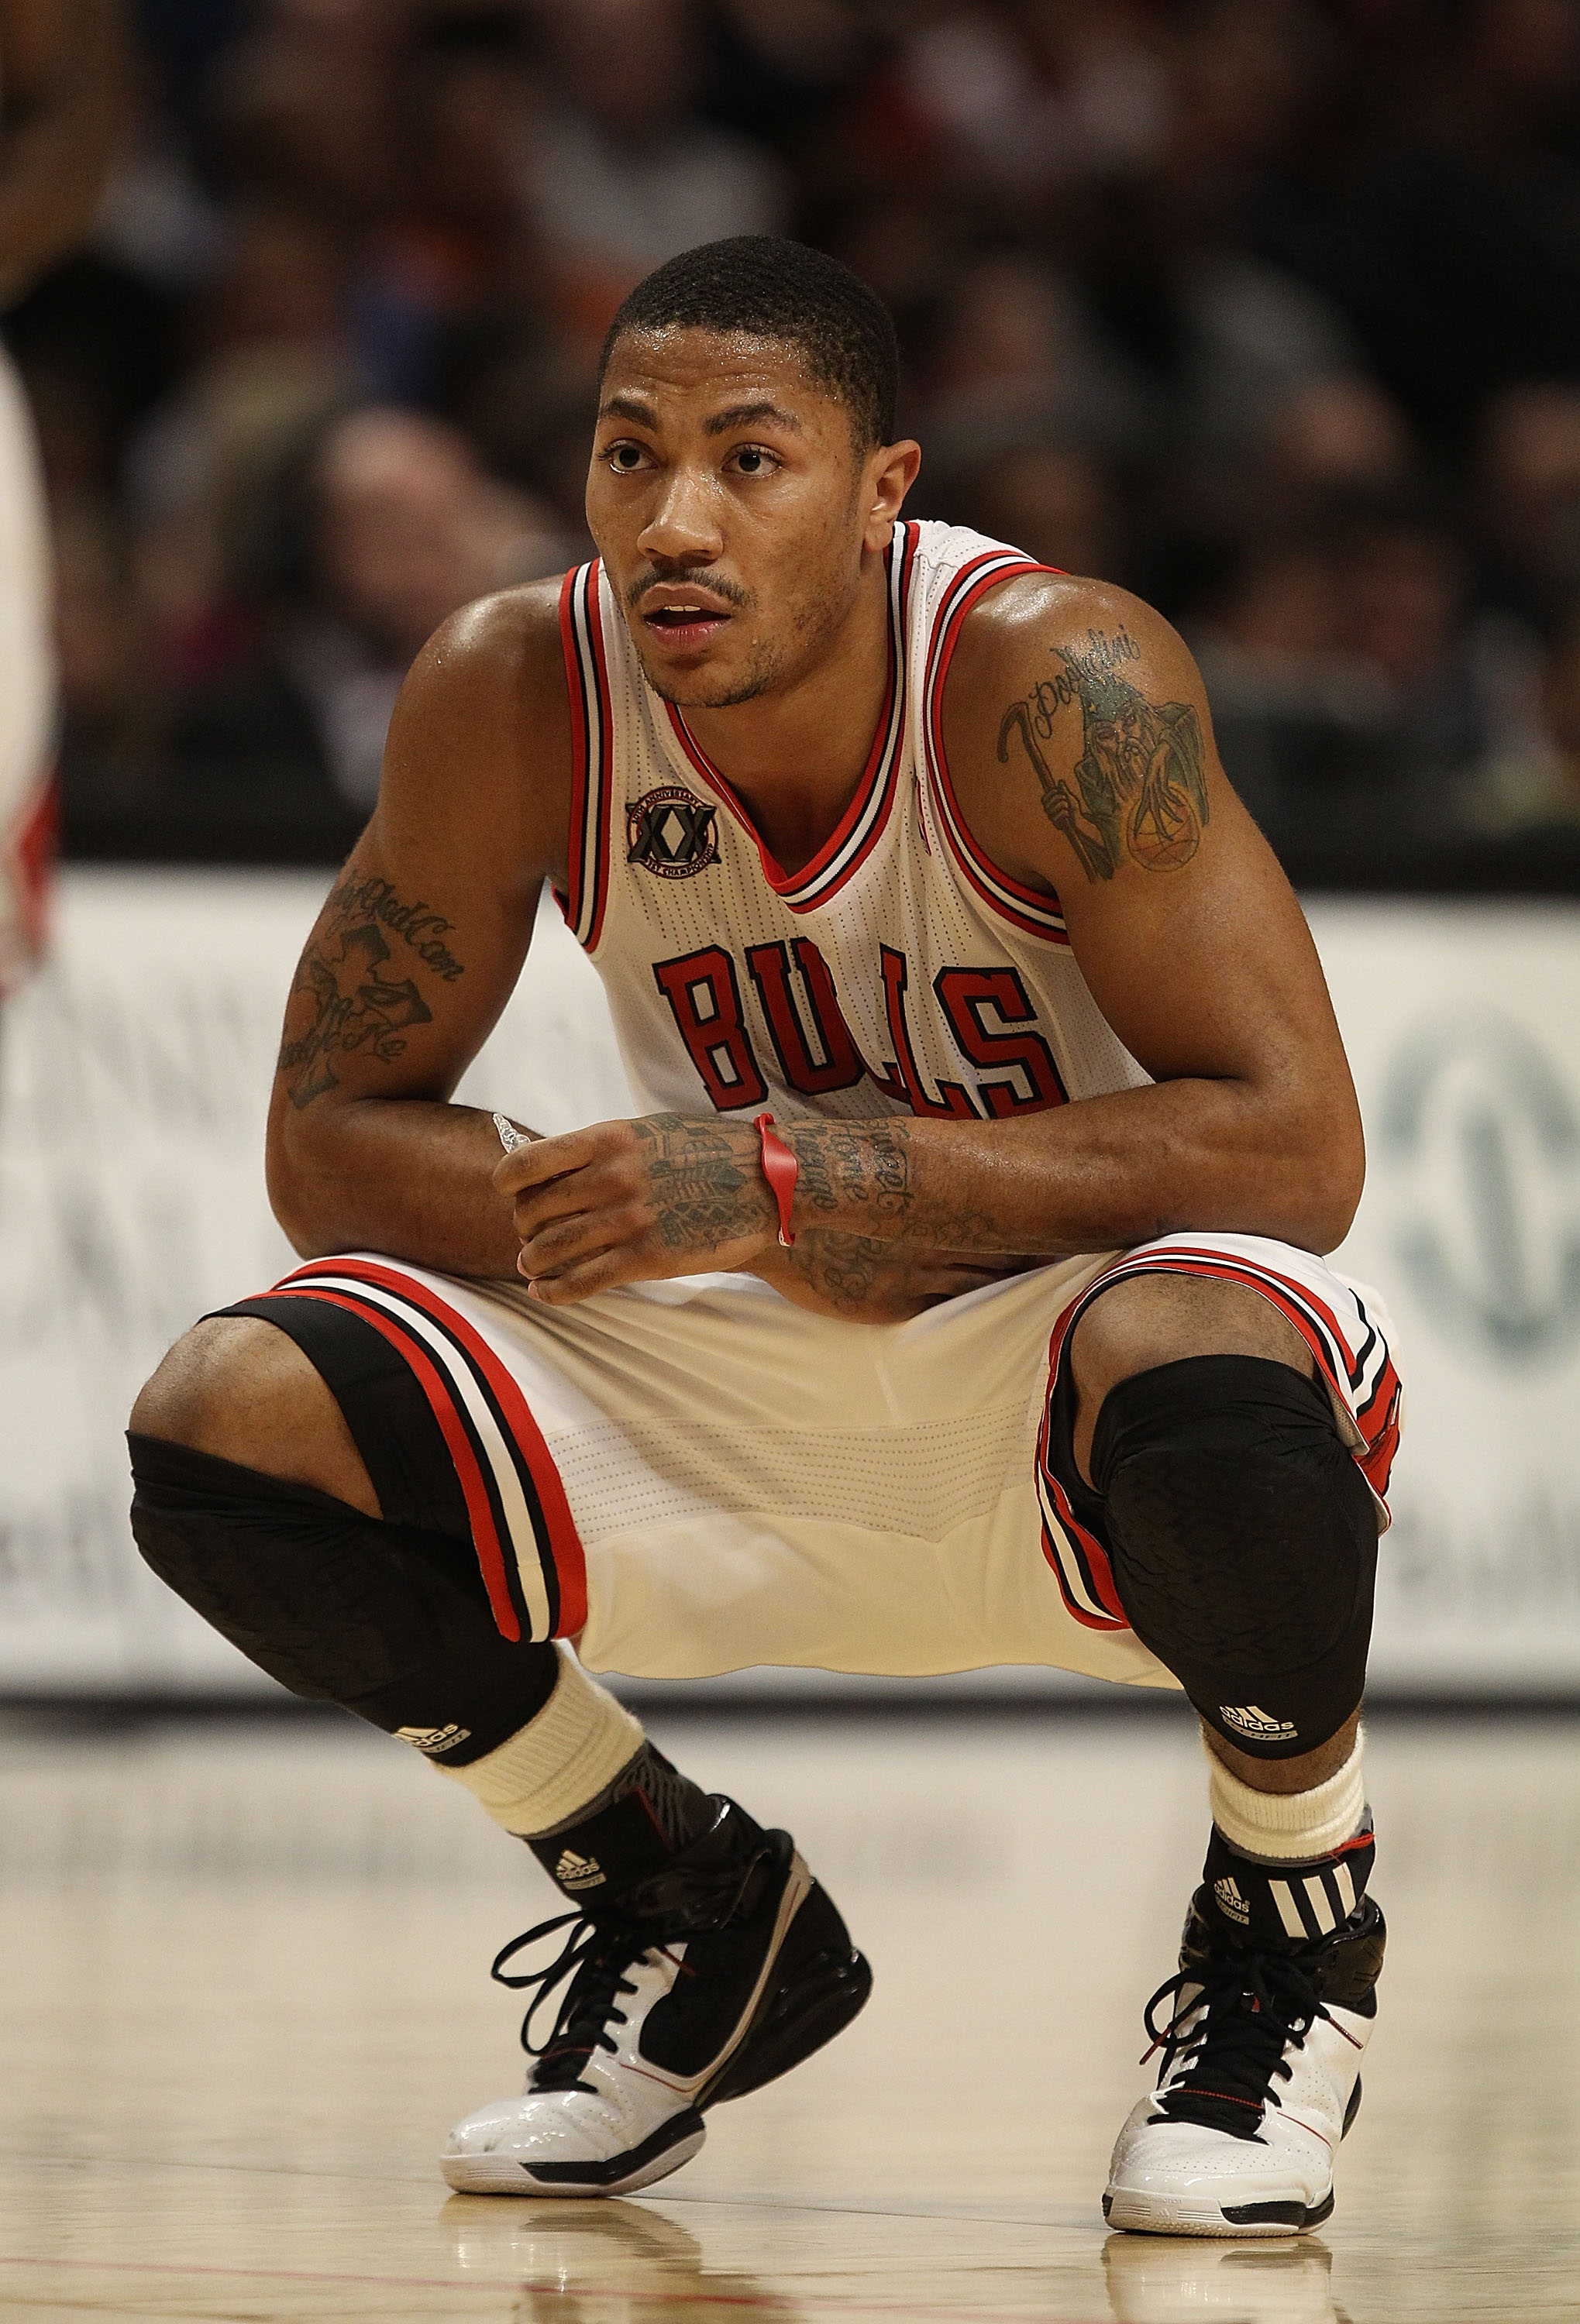 ON THIS DATE: Chicago Bulls' Derrick Rose named youngest MVP in